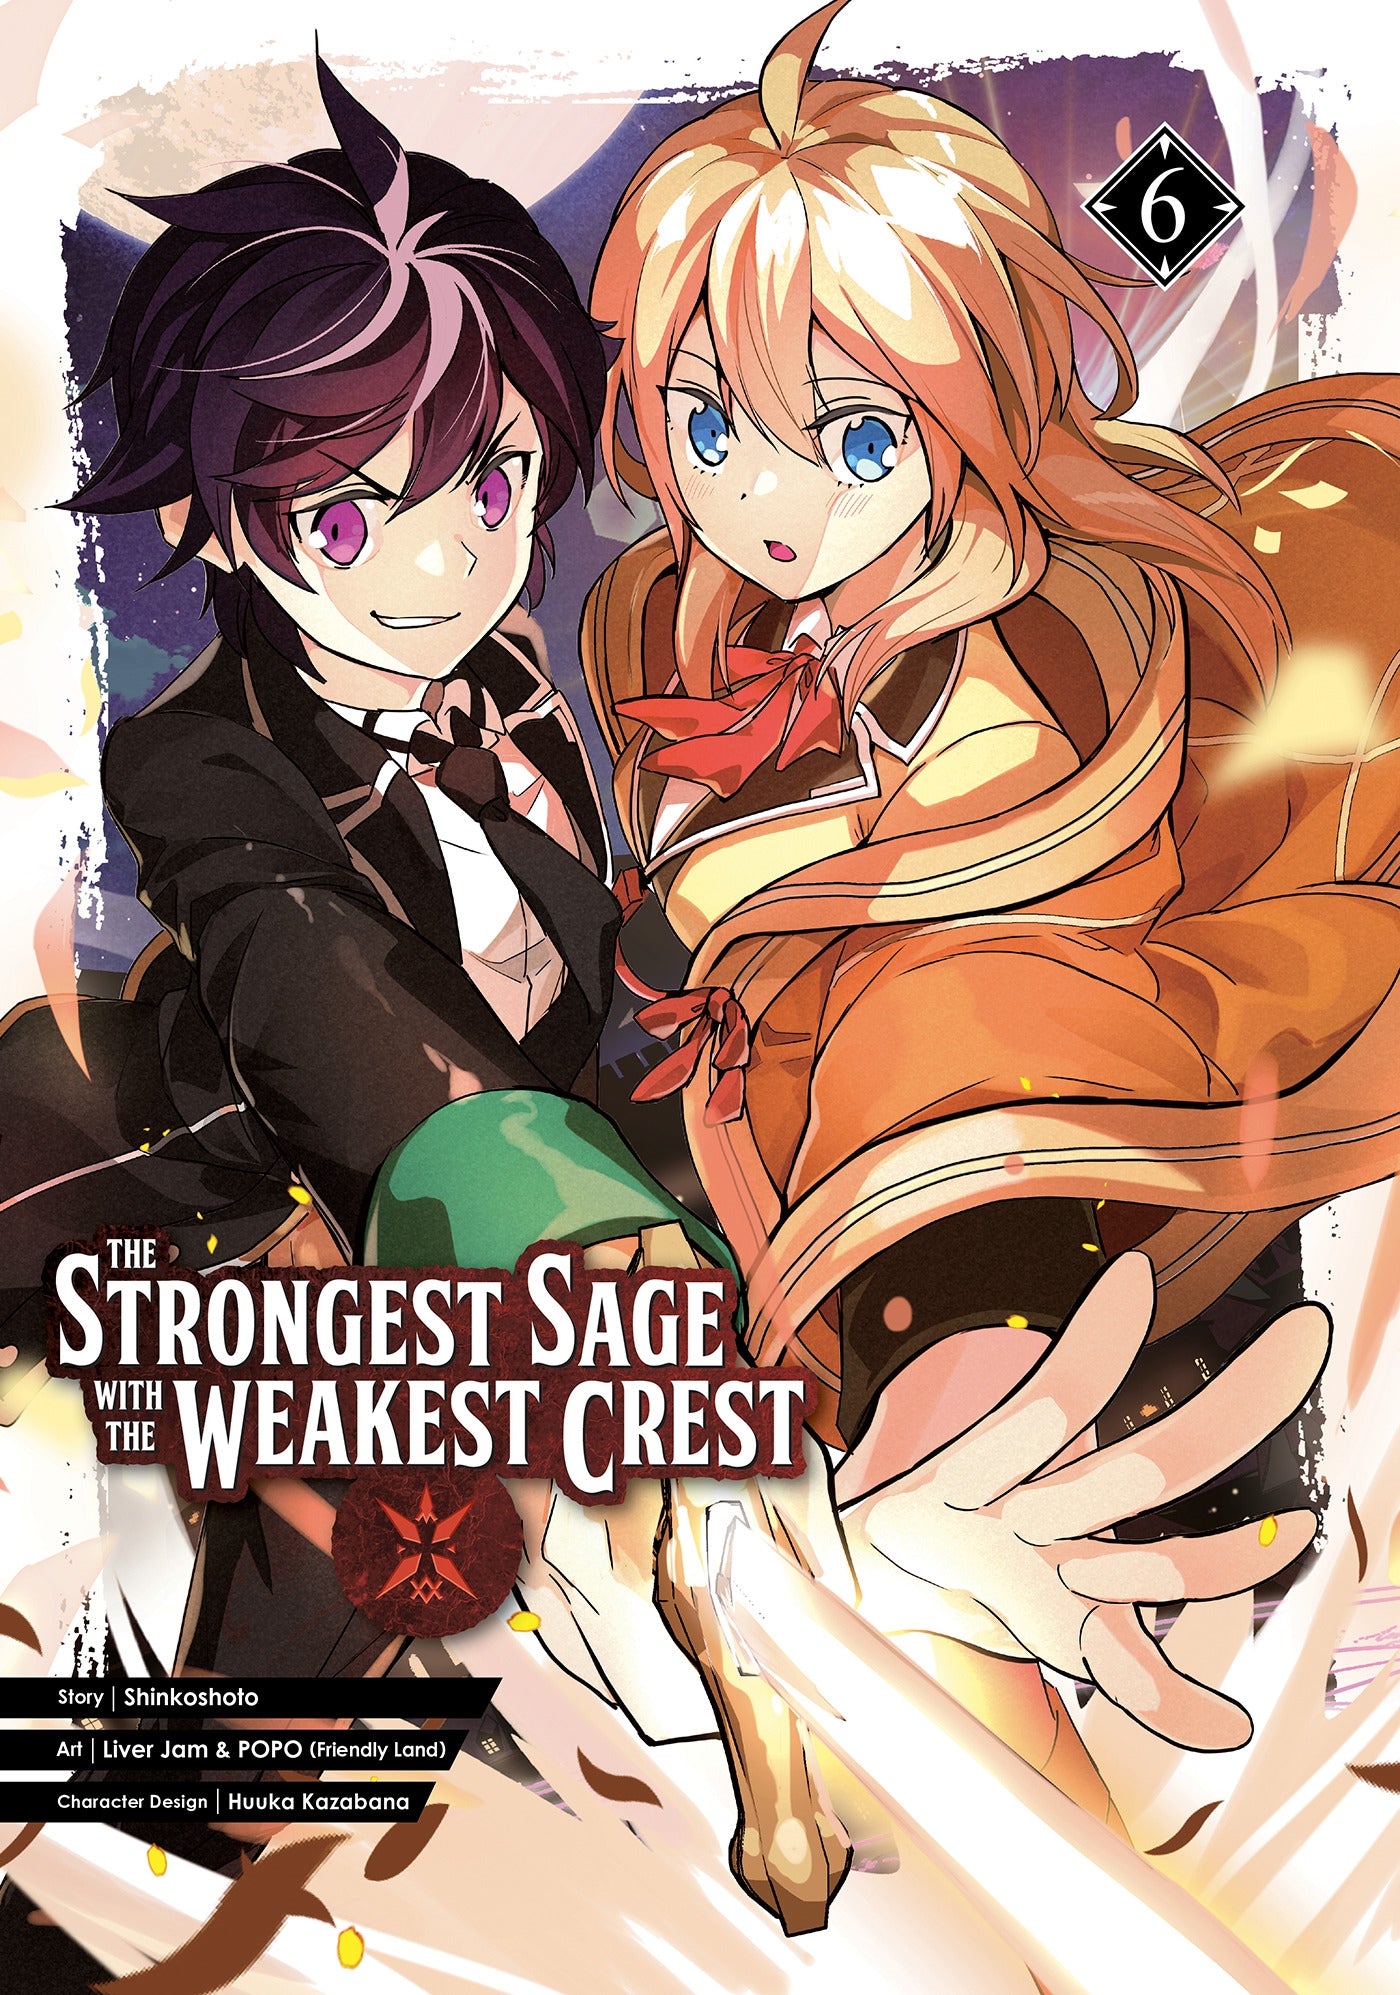 The Strongest Sage with the Weakest Crest 06 - Manga Warehouse